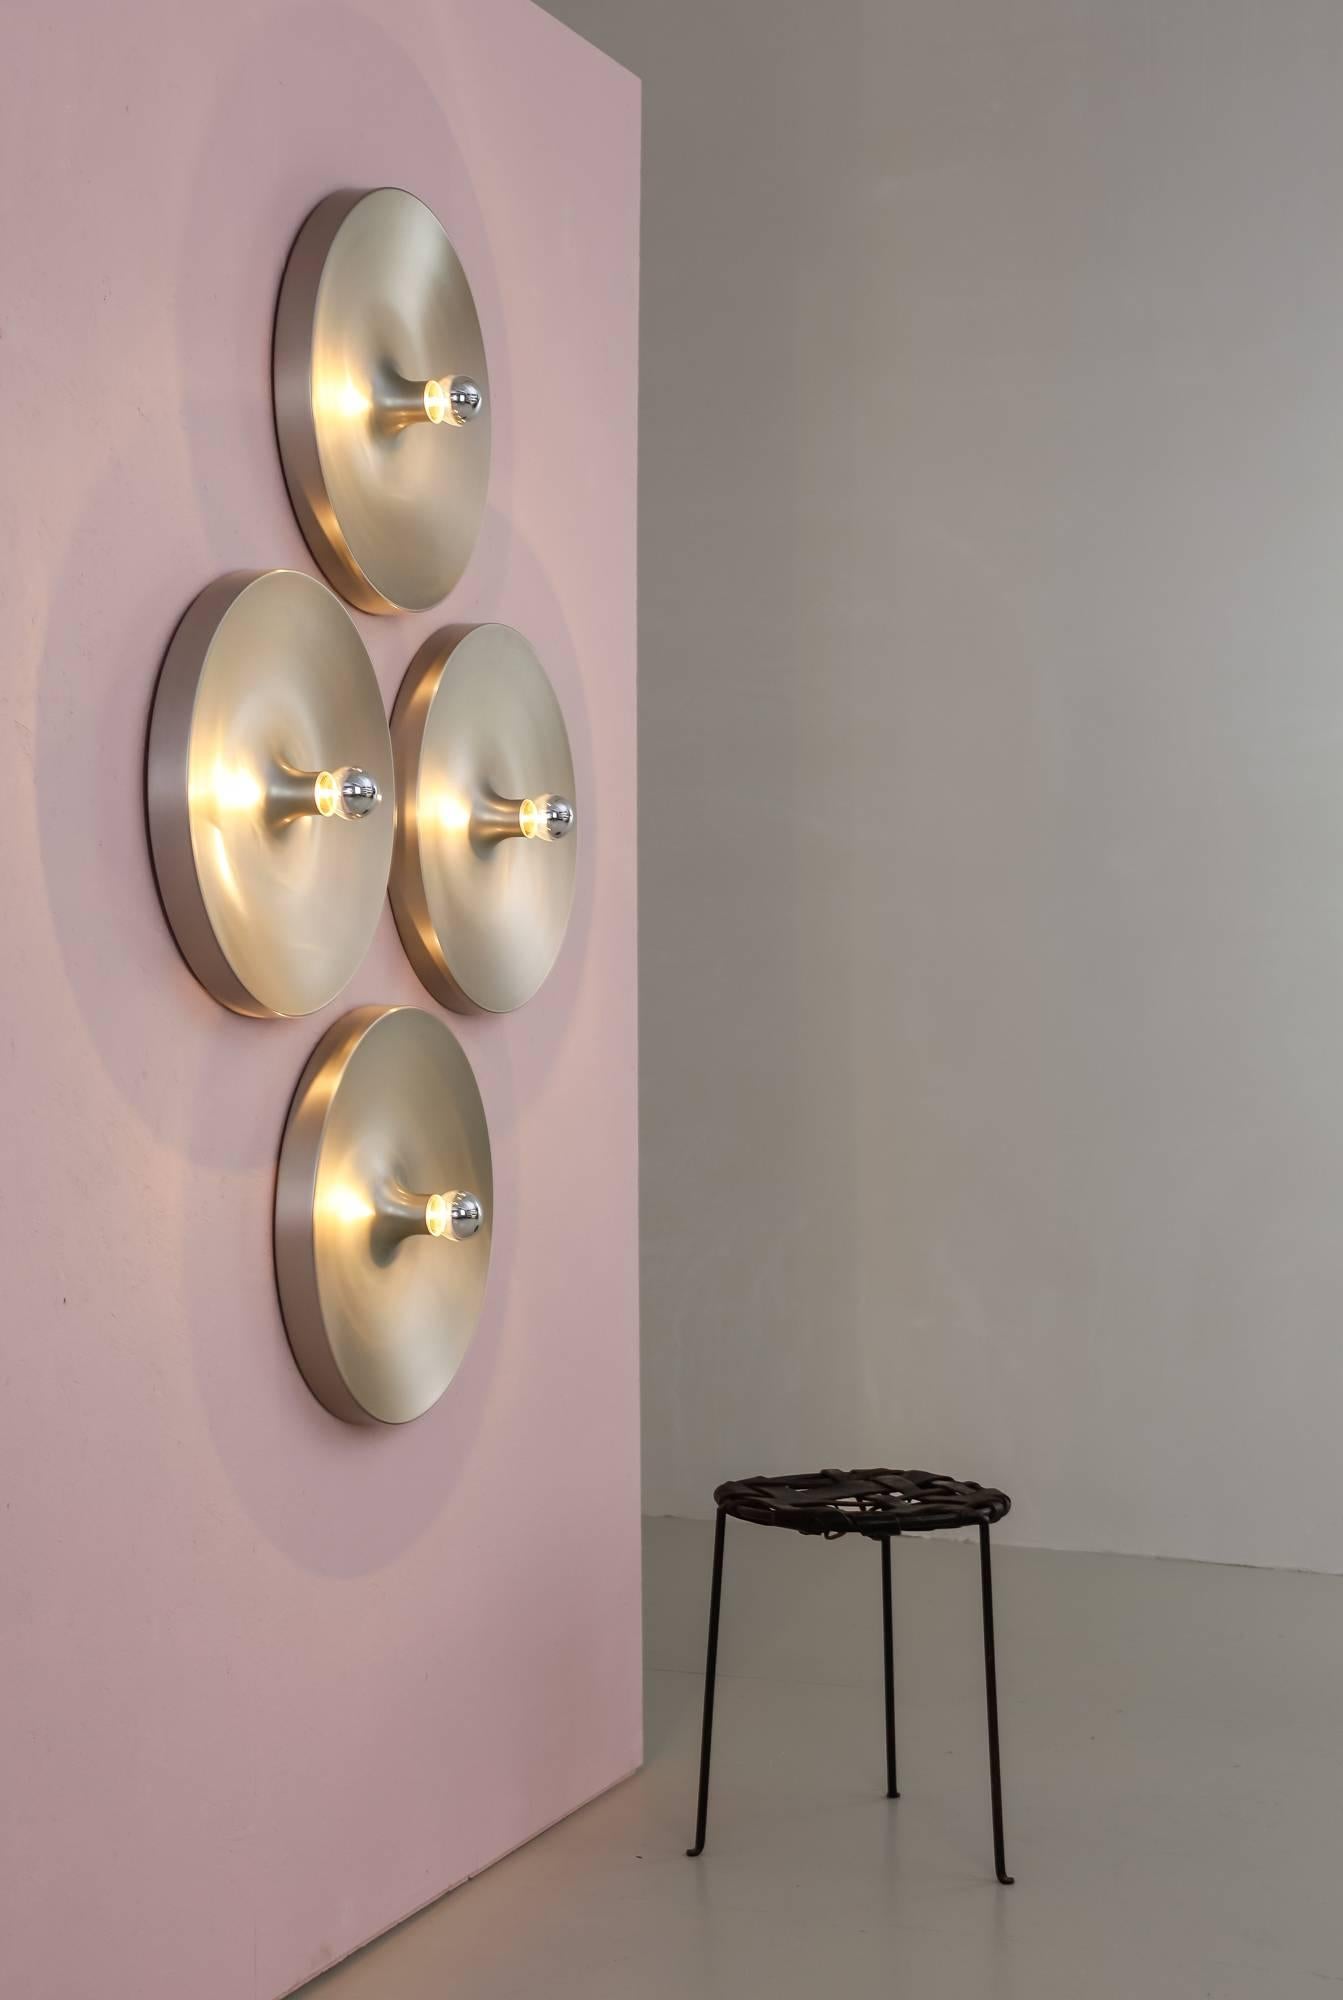 Mid-Century aluminum flush mount wall or ceiling lamps by Honsel Leuchten, Germany. These Minimalist lamps are made of a round and convex, spun aluminum shade with the visible light bulb in the centre.
Charlotte Perriand used this lamp in apartments